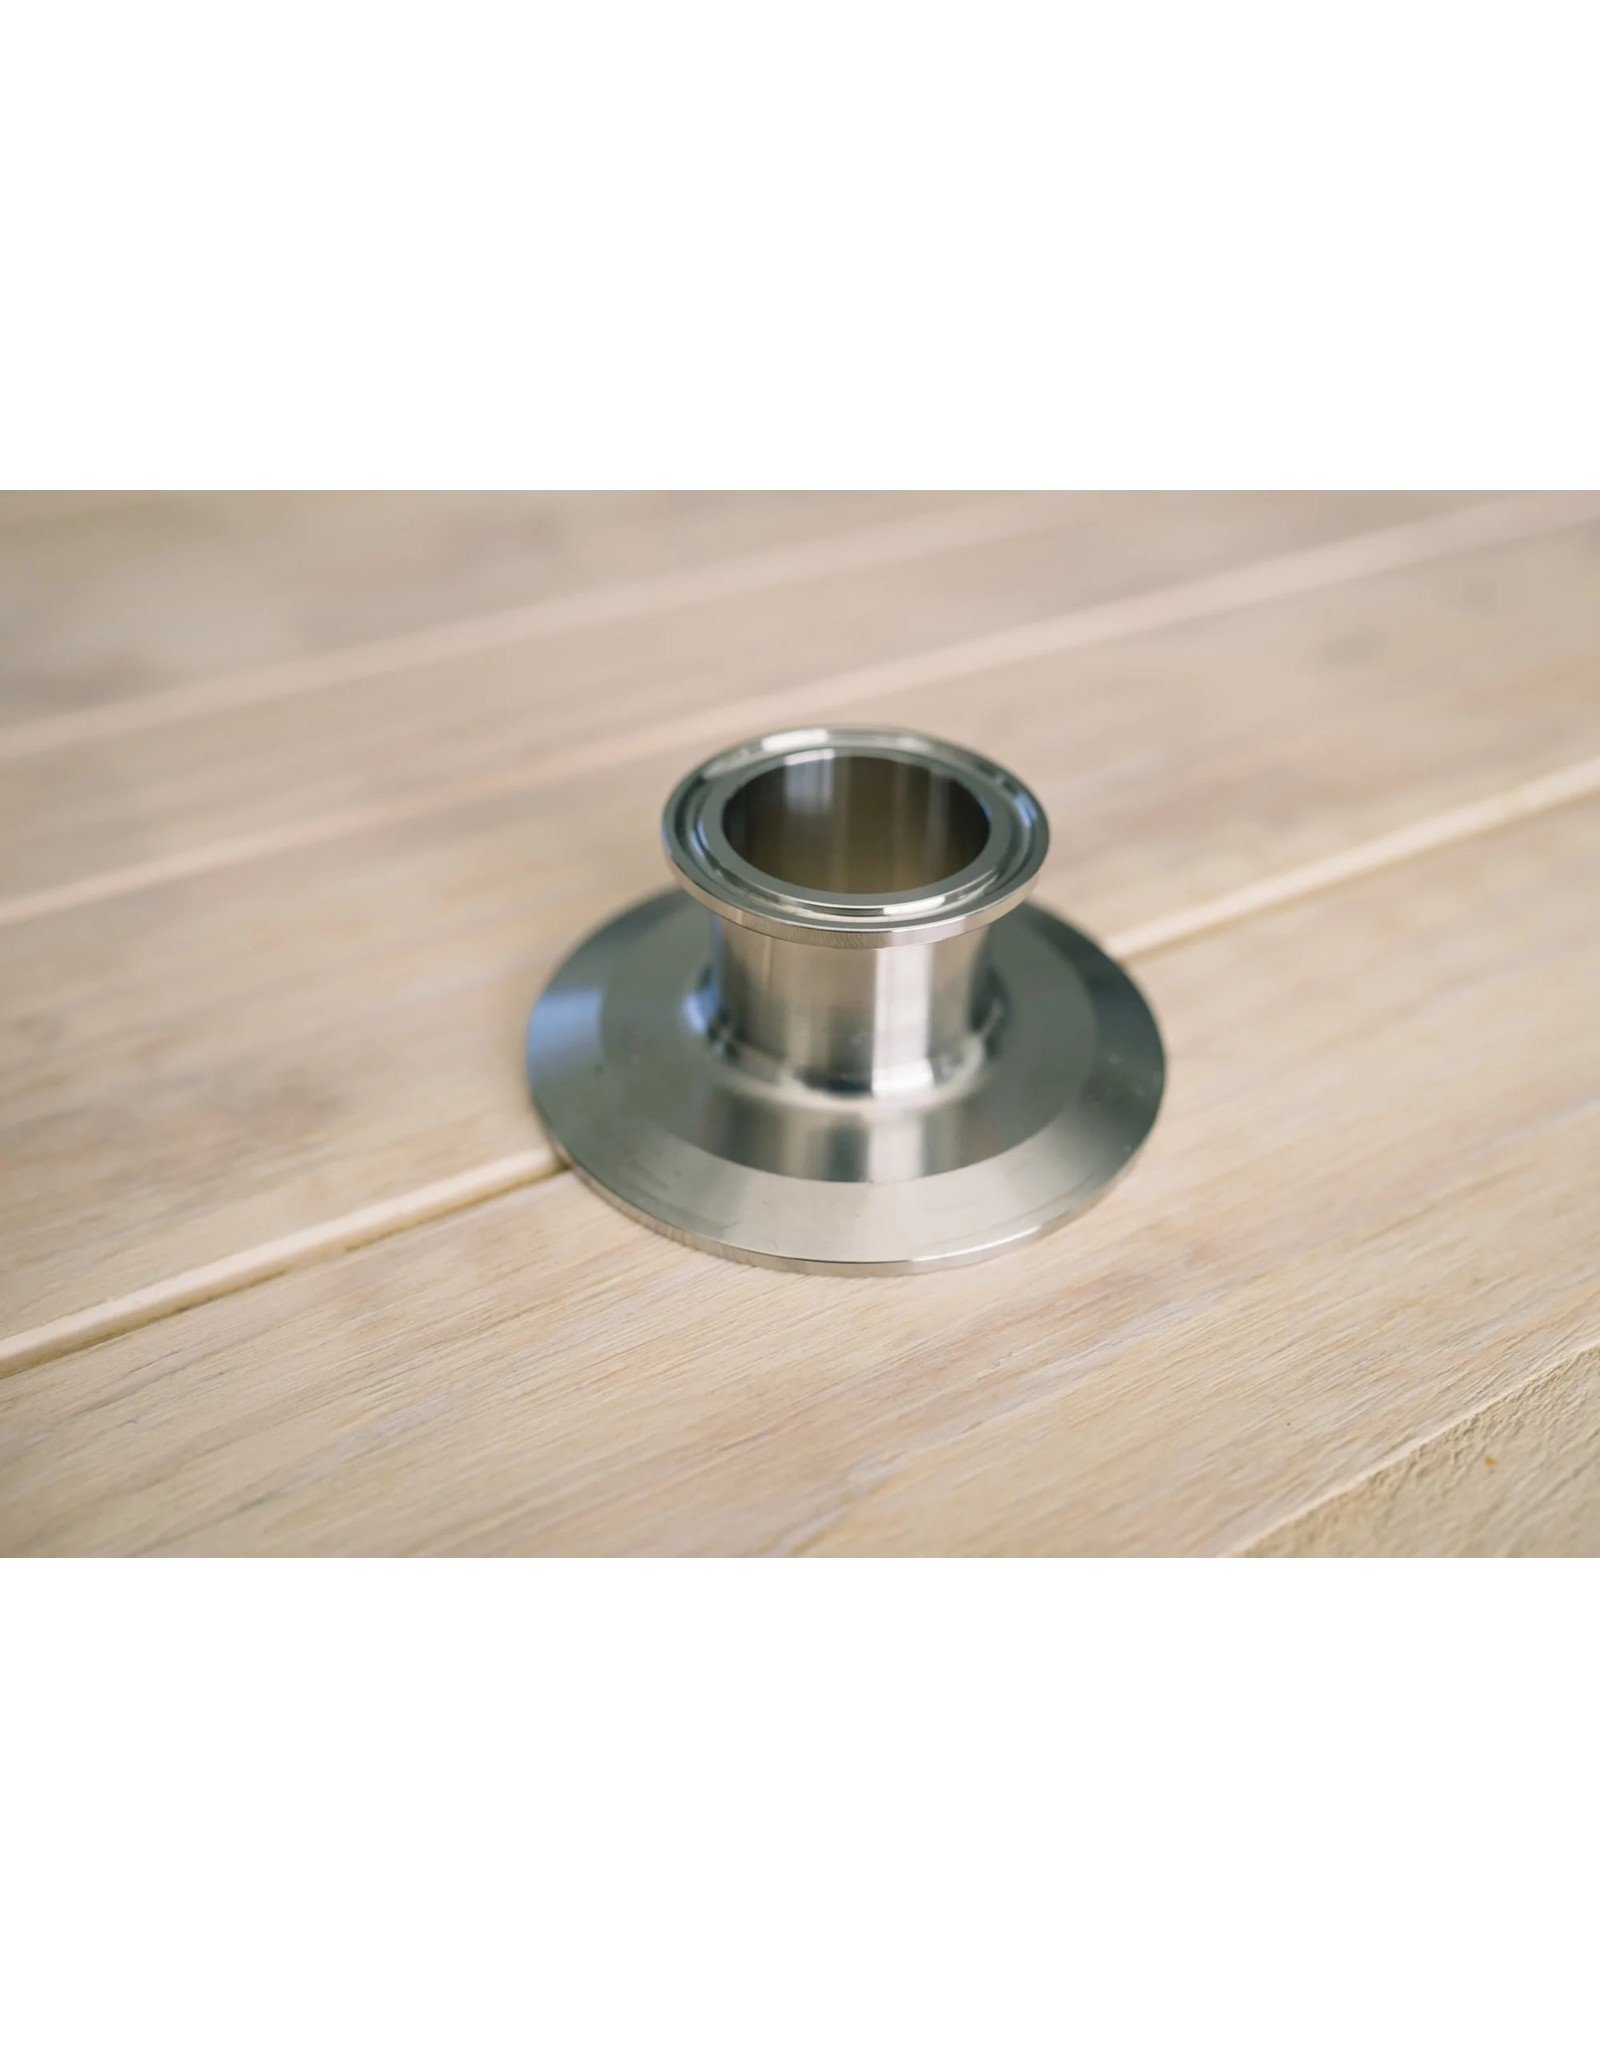 SS Brewtech Tri clamp 3" to 1.5" reducer